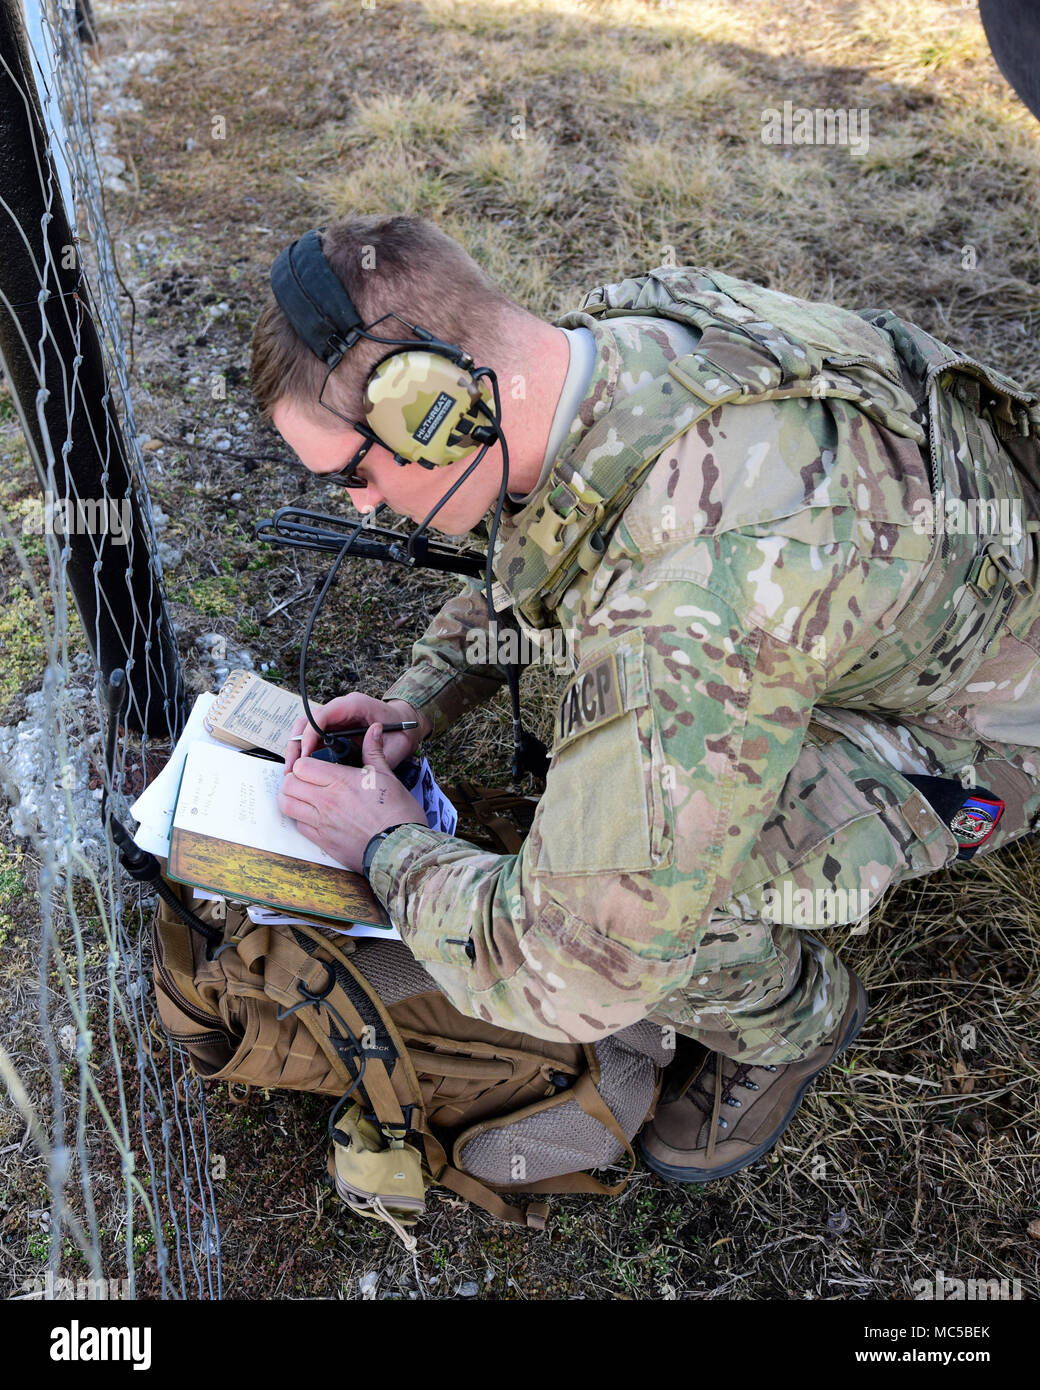 A Joint Terminal Attack Controller from the 7th Air Support Operations Squadron, located in Fort Bliss, Texas, writes down information during a joint training at Warsaw, Mo., Jan. 31, 2018. JTACs are personnel who are authorized to call airstrikes and help coordinate close-air-support missions. (U.S. Air Force by Staff Sgt. Danielle Quilla) Stock Photo